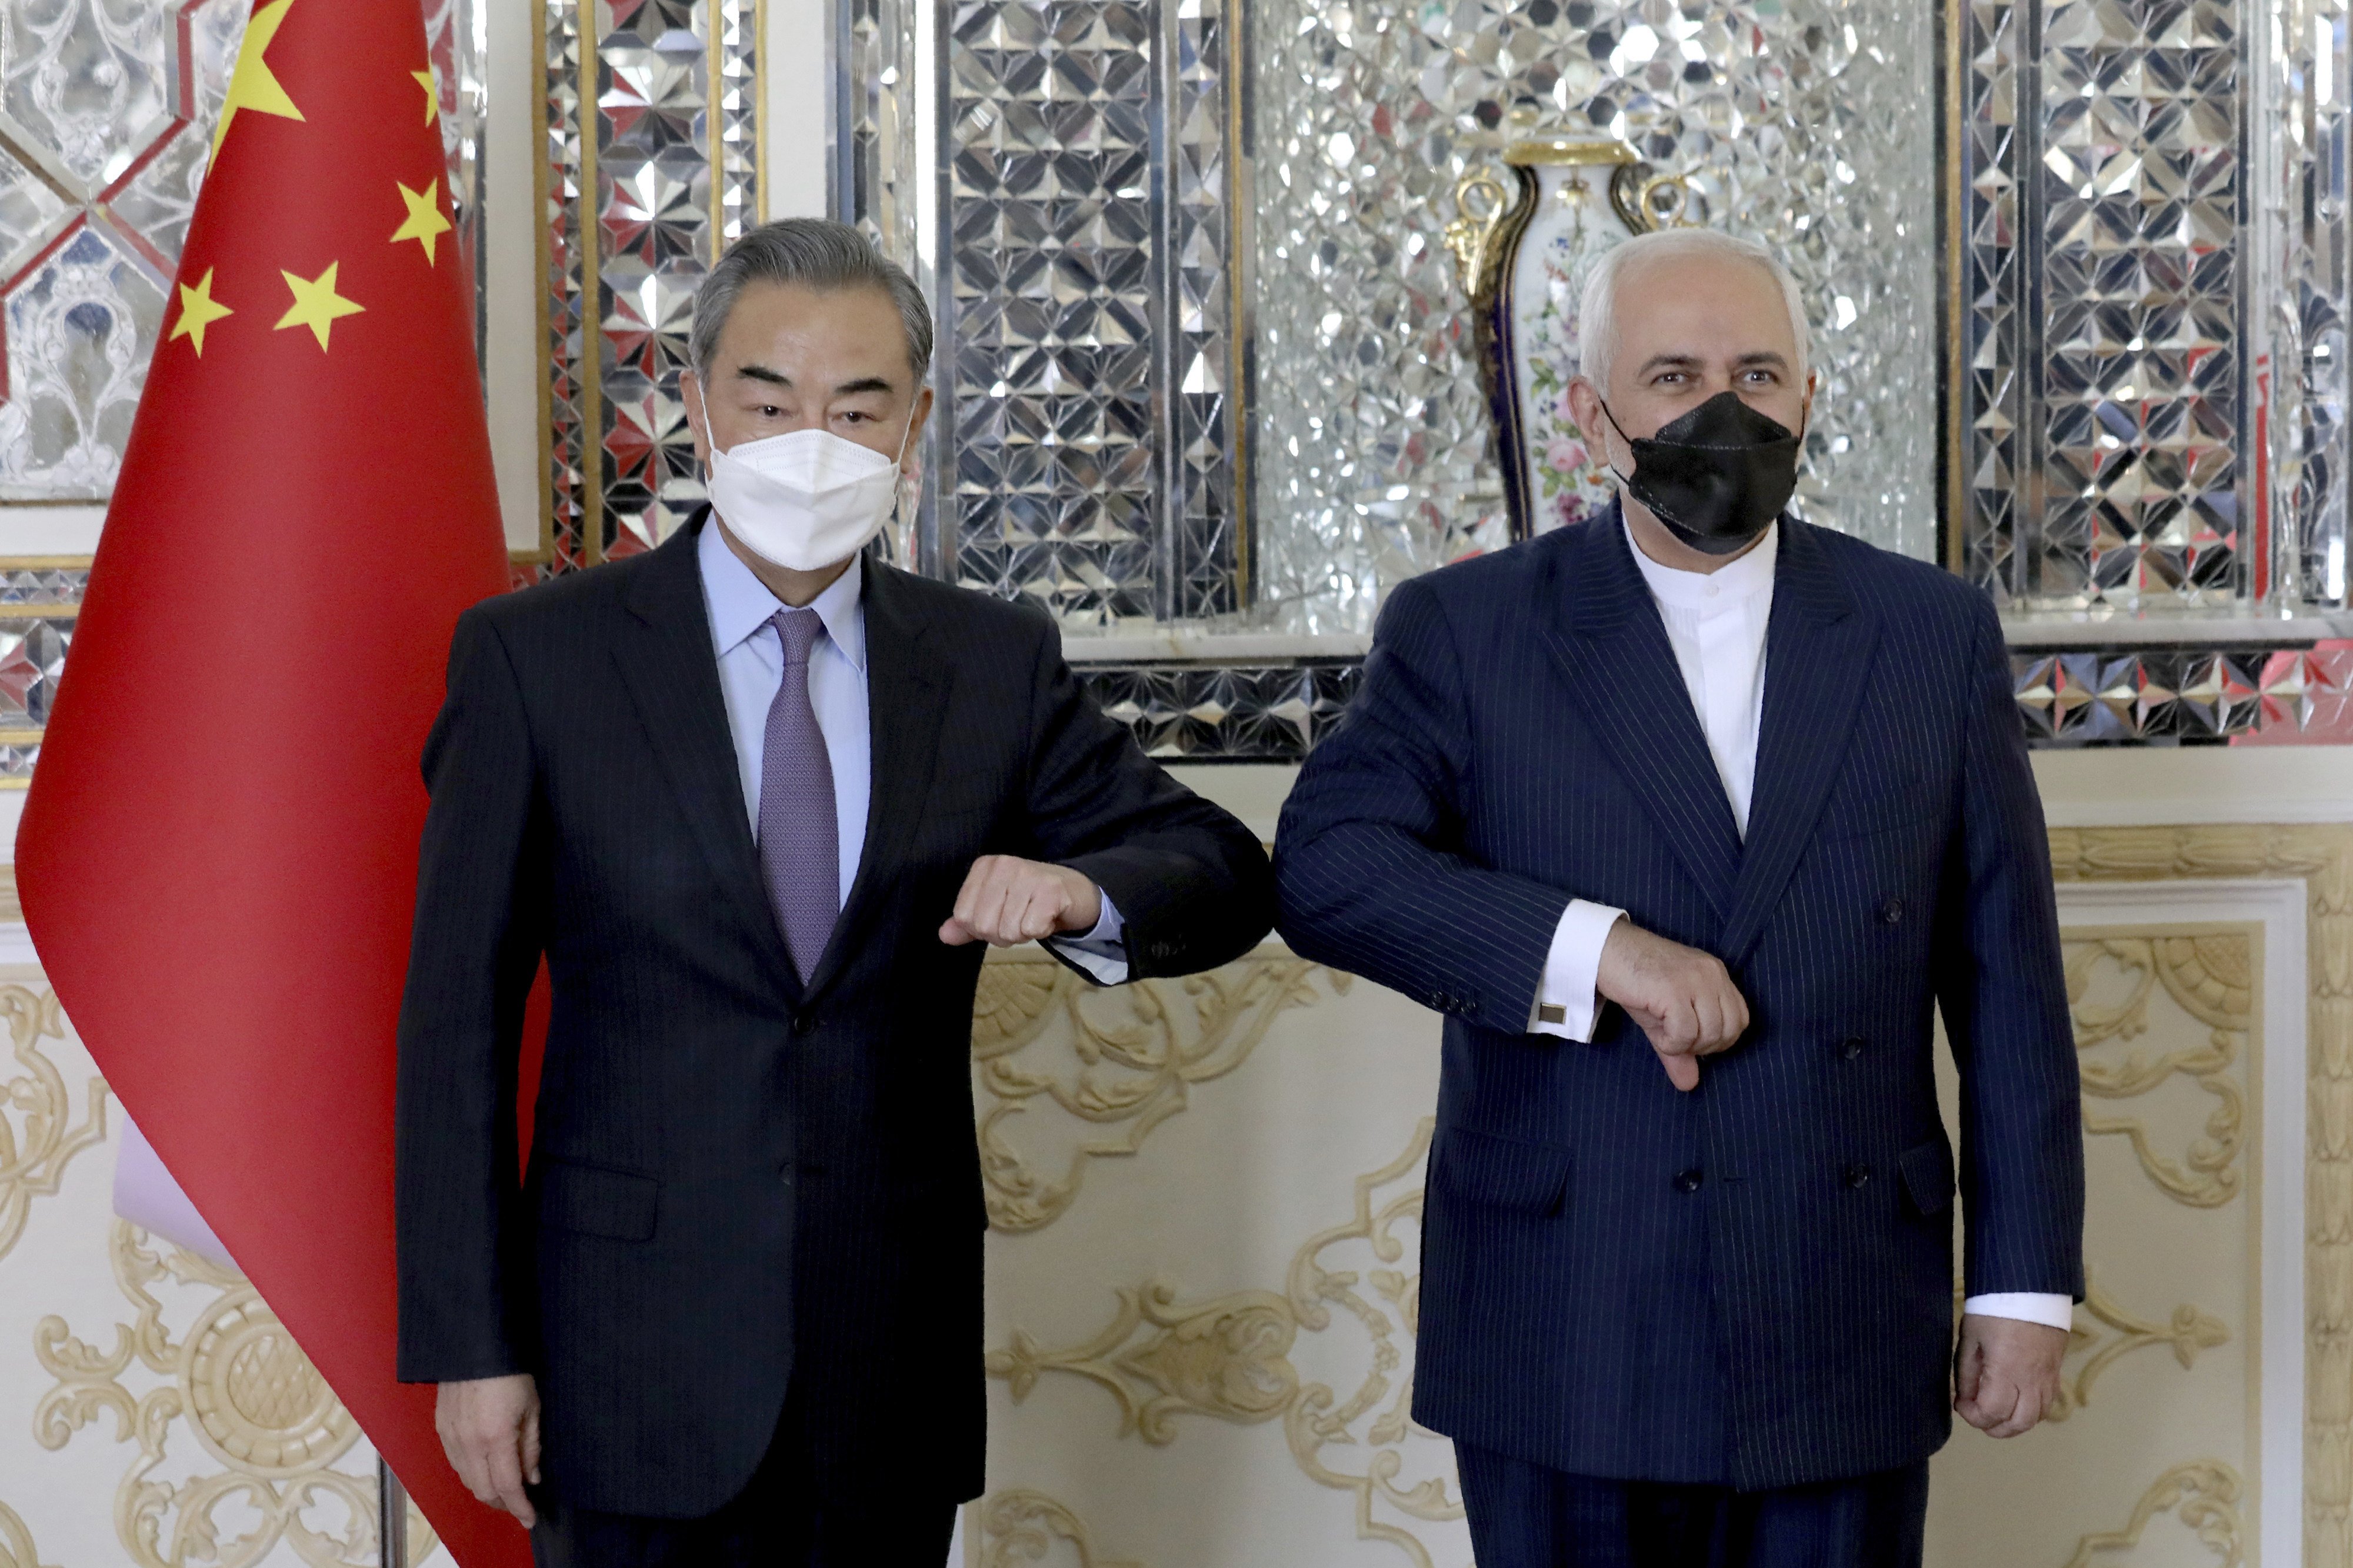 China’s Foreign Minister Wang Yi poses with his Iranian counterpart Mohammad Javad Zarif in Tehran on Saturday. Photo: AP